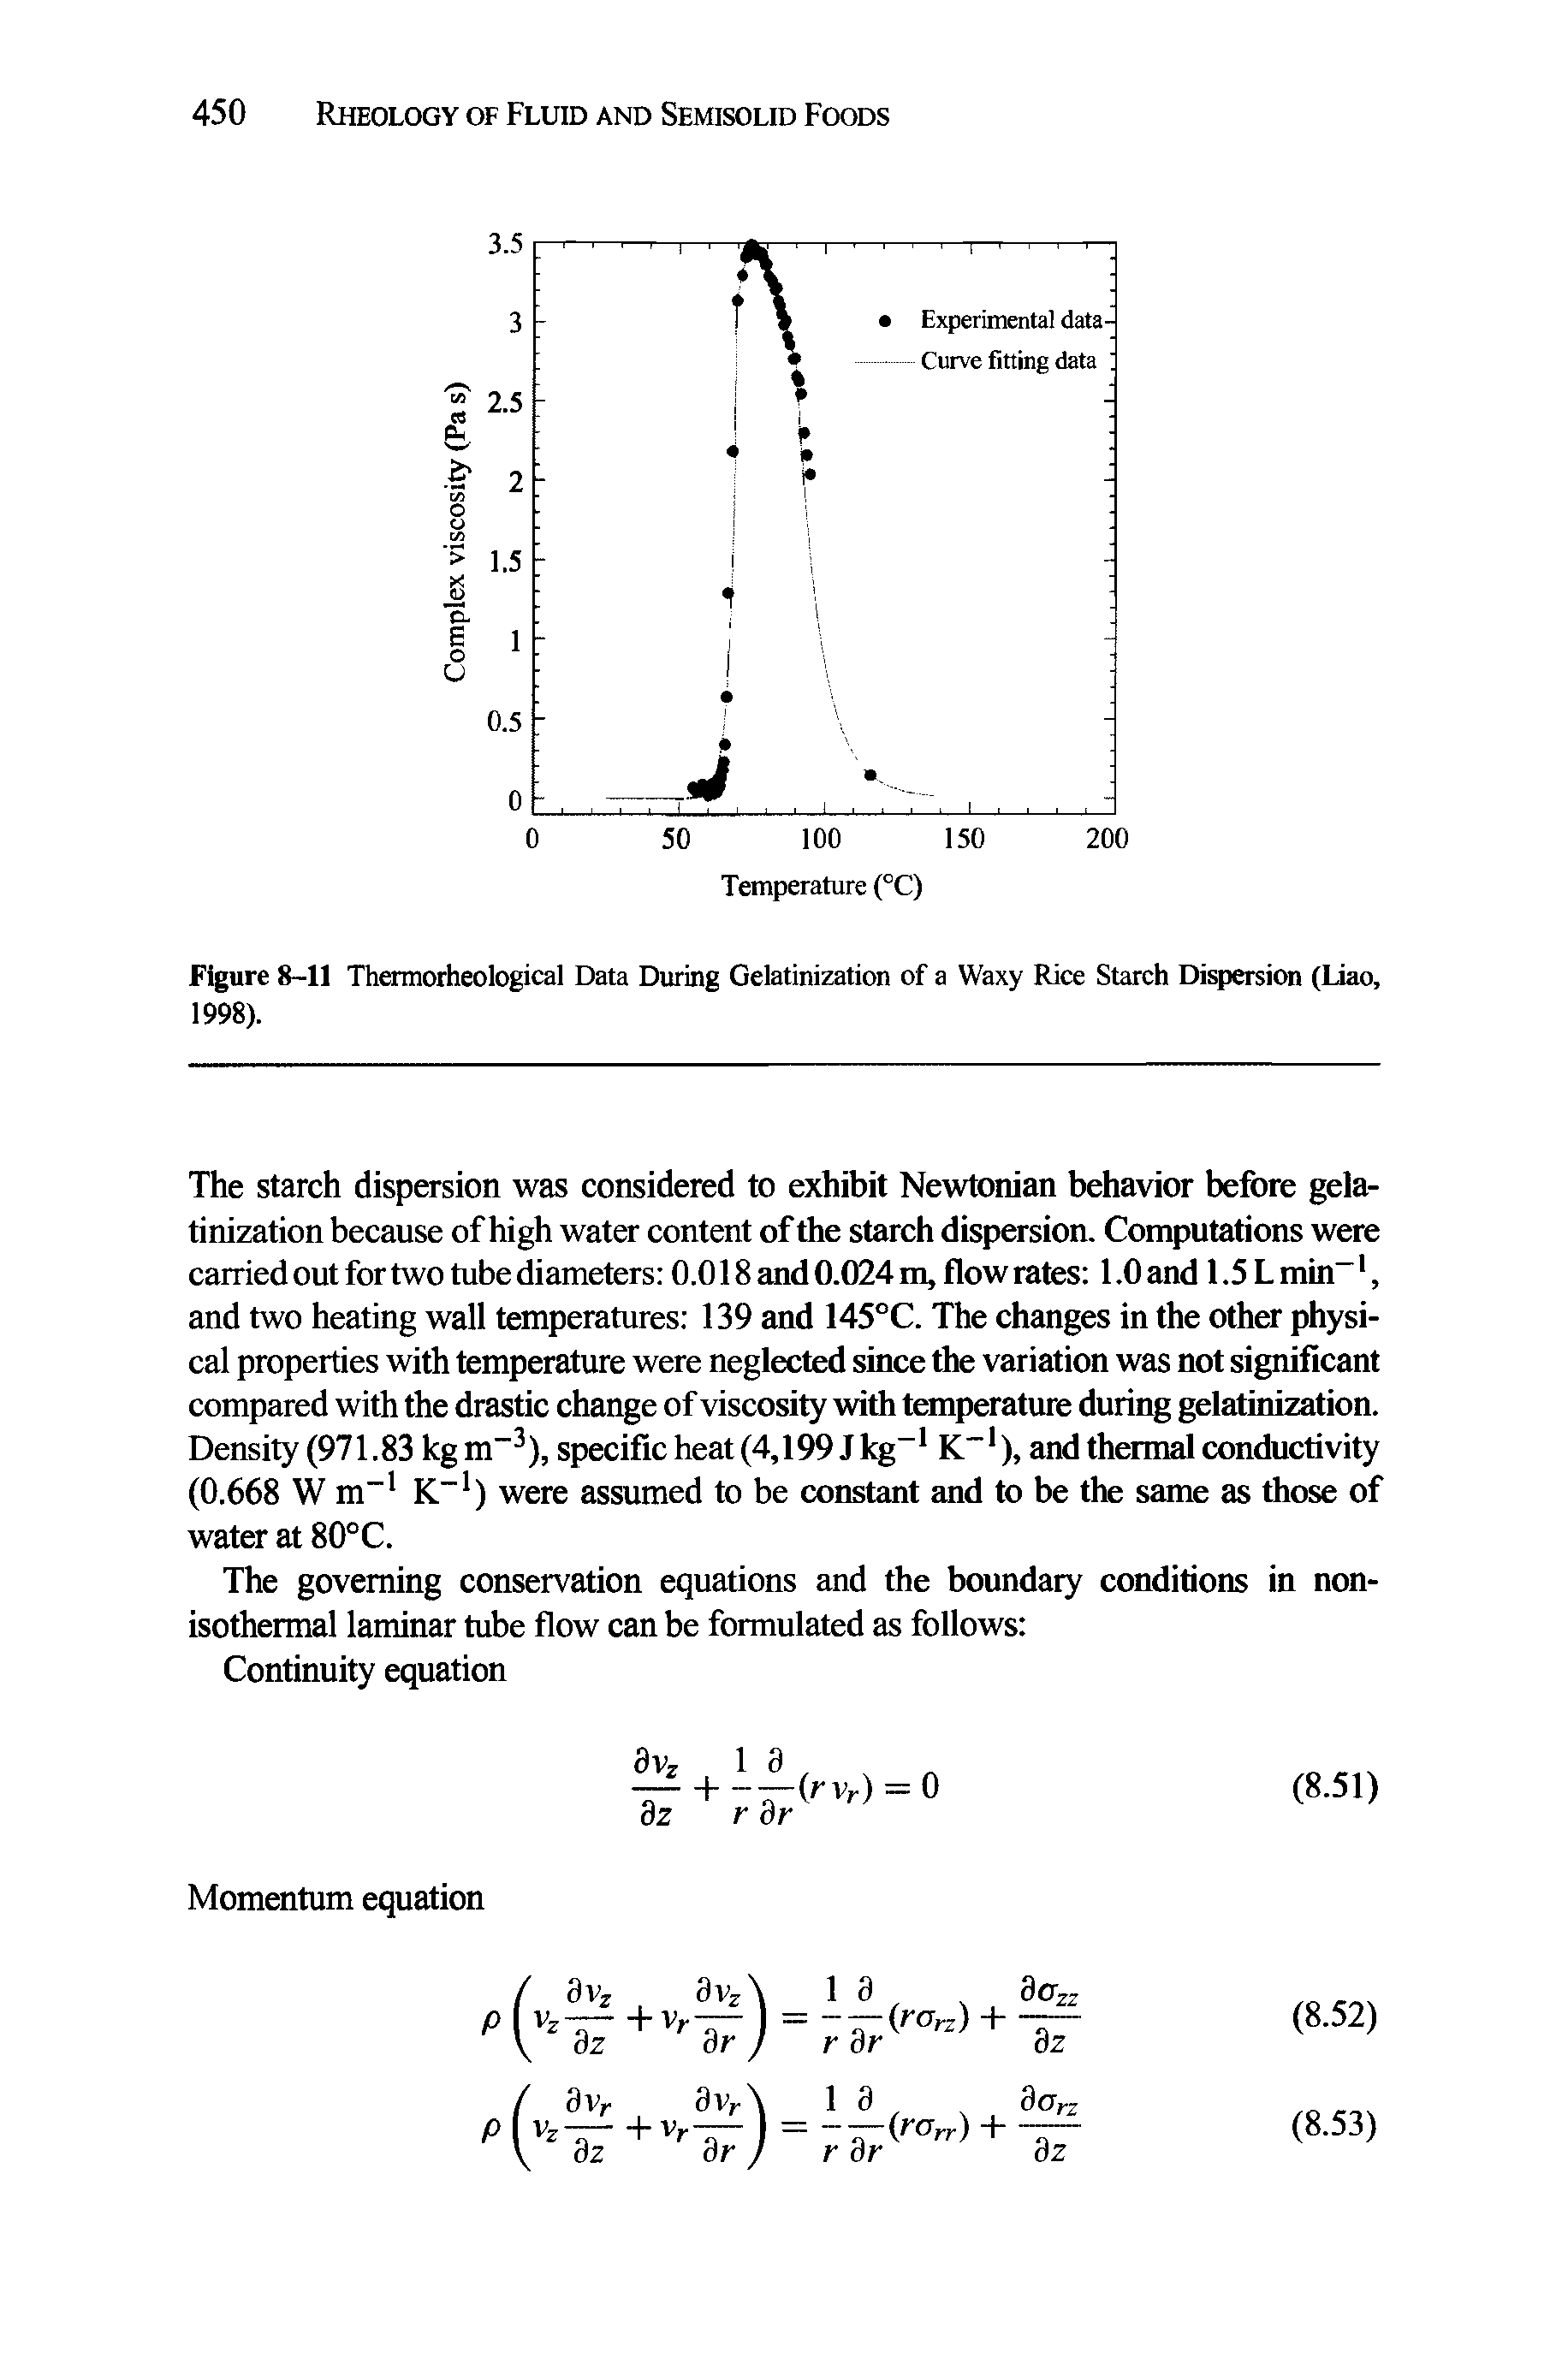 Figure 8-11 Thermorheological Data During Gelatinization of a Waxy Rice Starch Dispersion (liao, 1998).